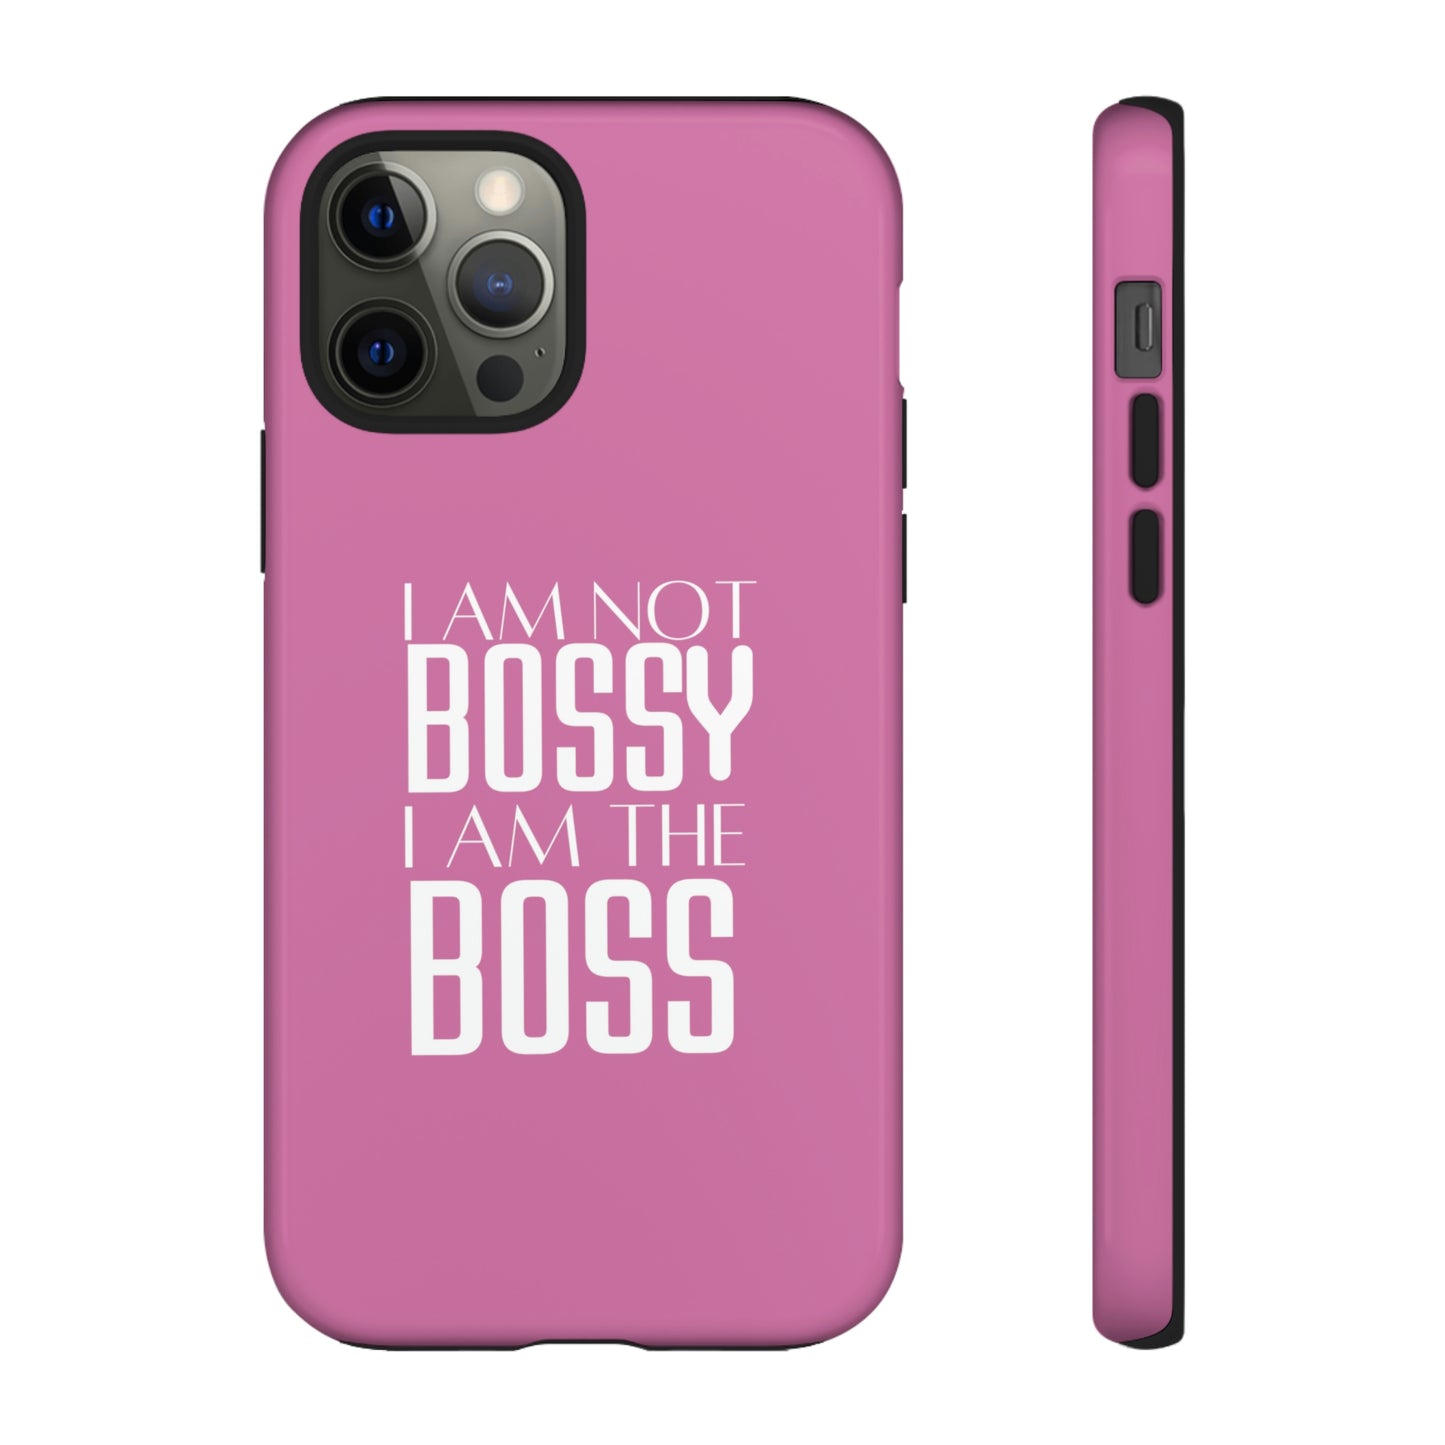 Inspire Empire || Tough Cases || I am not bossy, I am the Boss